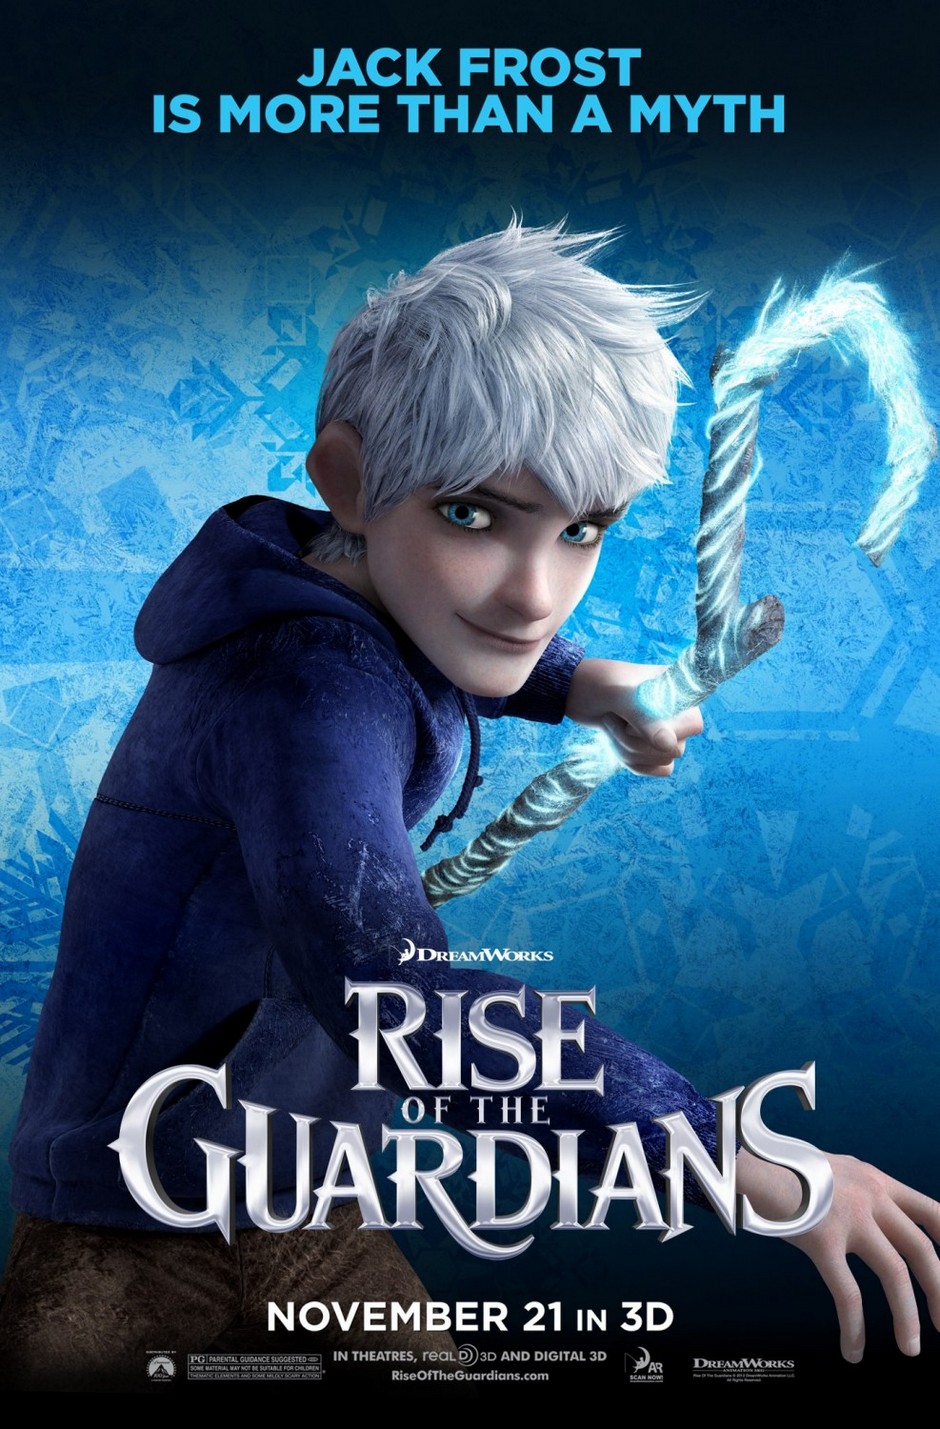 Jack Frost Rise of the Guardians Character